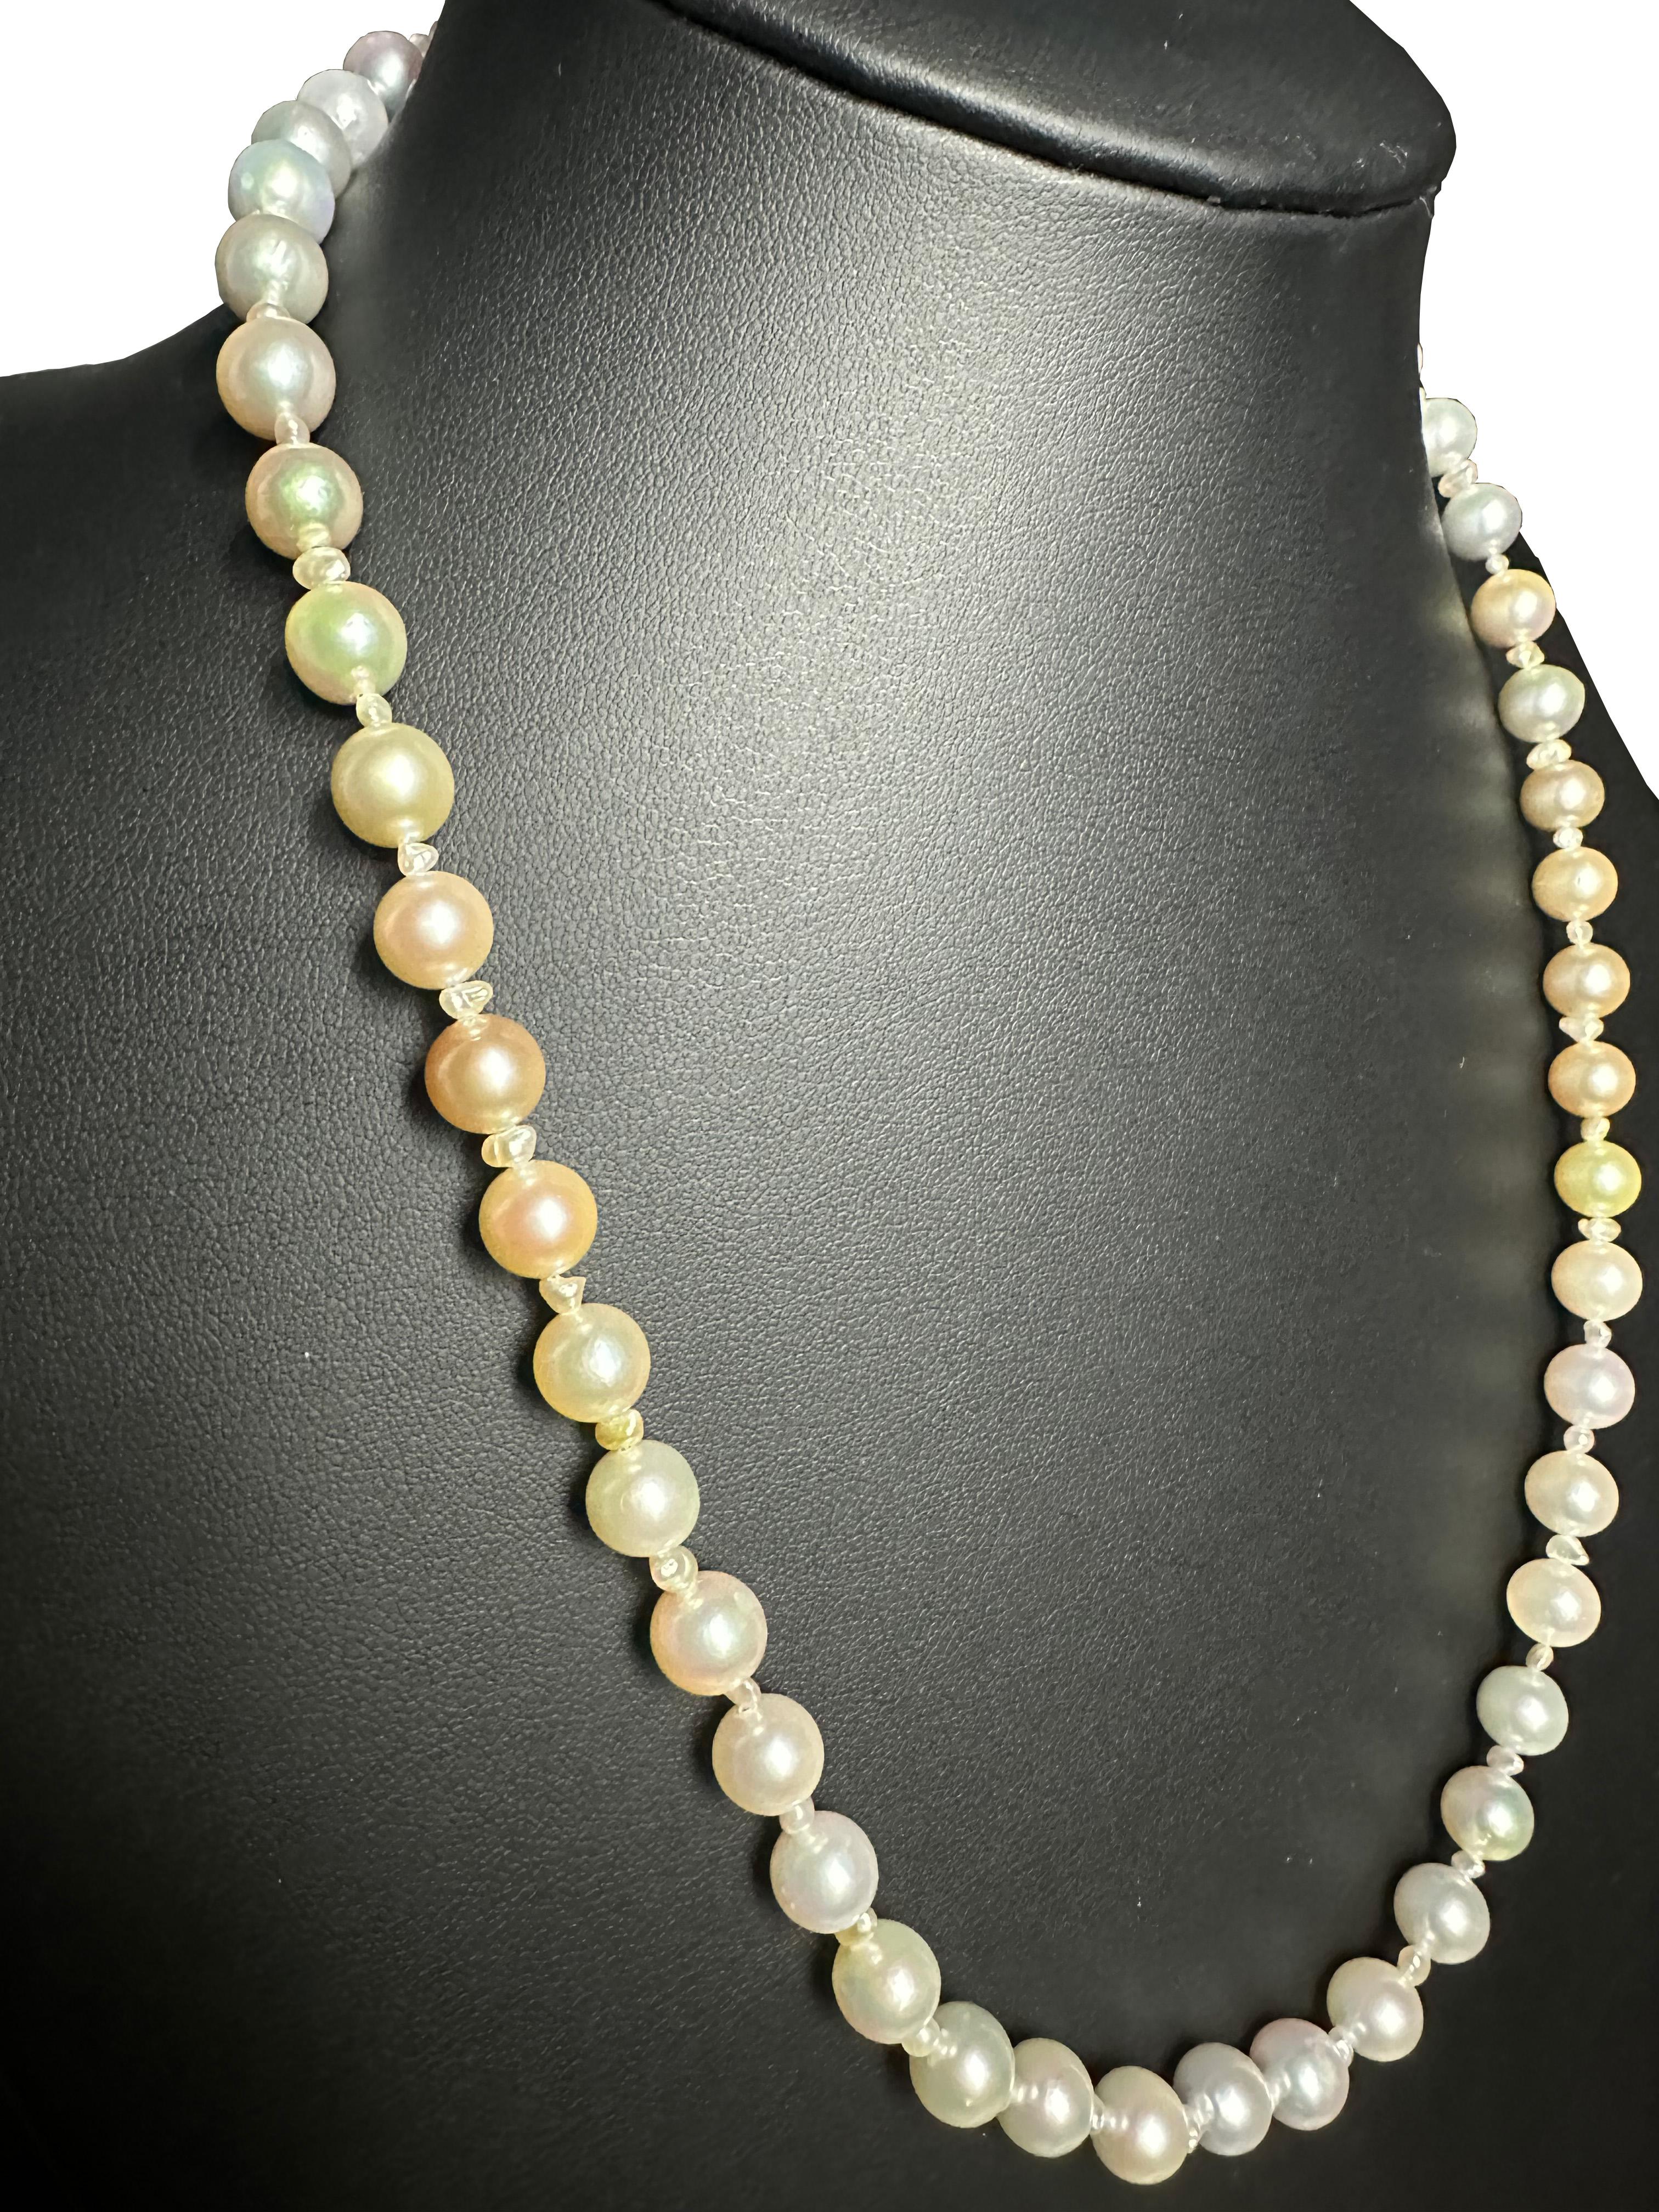 Creator: IRIS PARURE
Pearl farm: Ehime, Uwajima, JAPAN
Features:Non Colored & Non Bleached, BENI AKOYA®
Size of Pearl: 8.0mm-8.50mm
Number of Pearl: 53

 IRIS PARURE, since its establishment in 1953, has been crafting the finest quality pearl